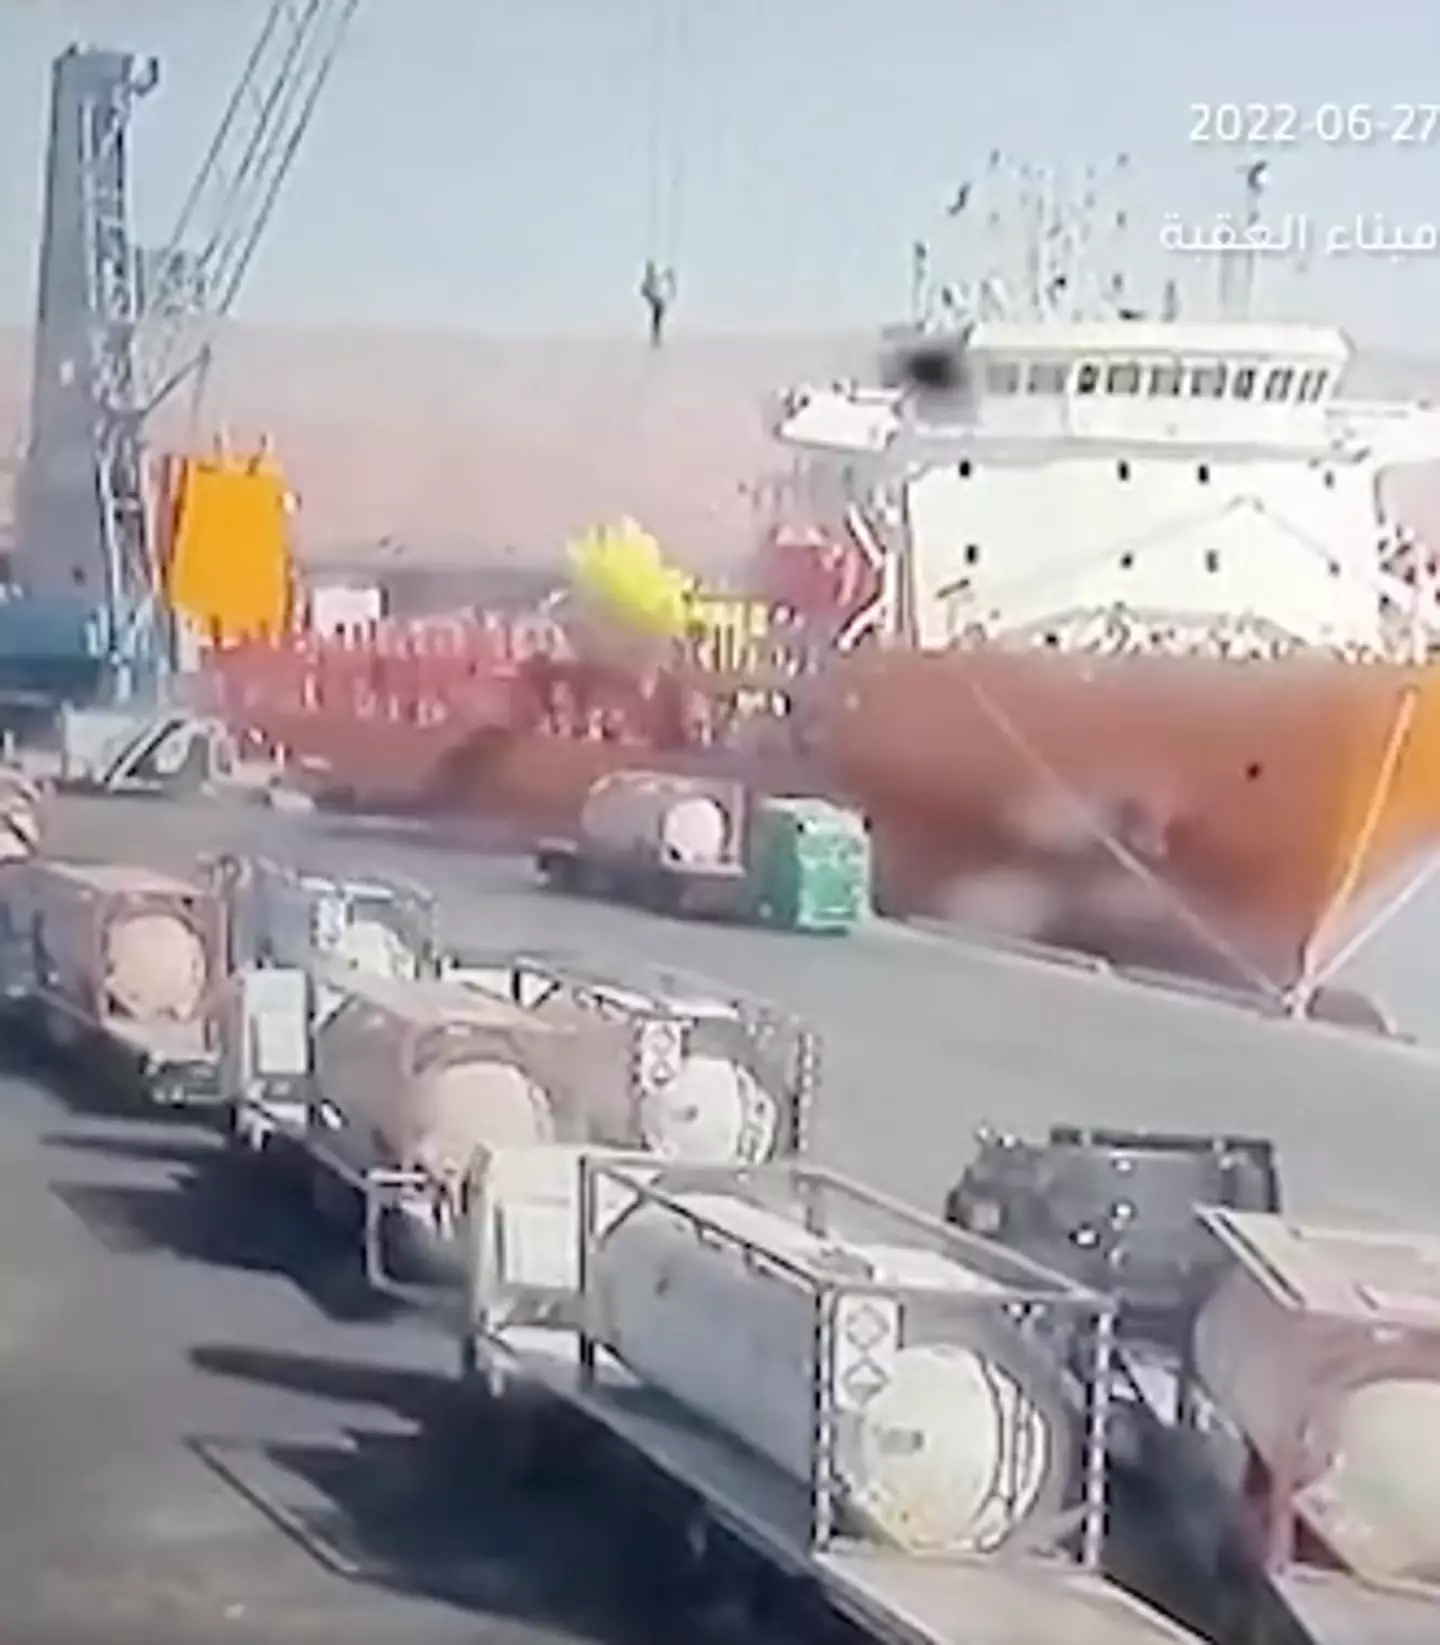 A container exploded, releasing a cloud of chlorine gas.